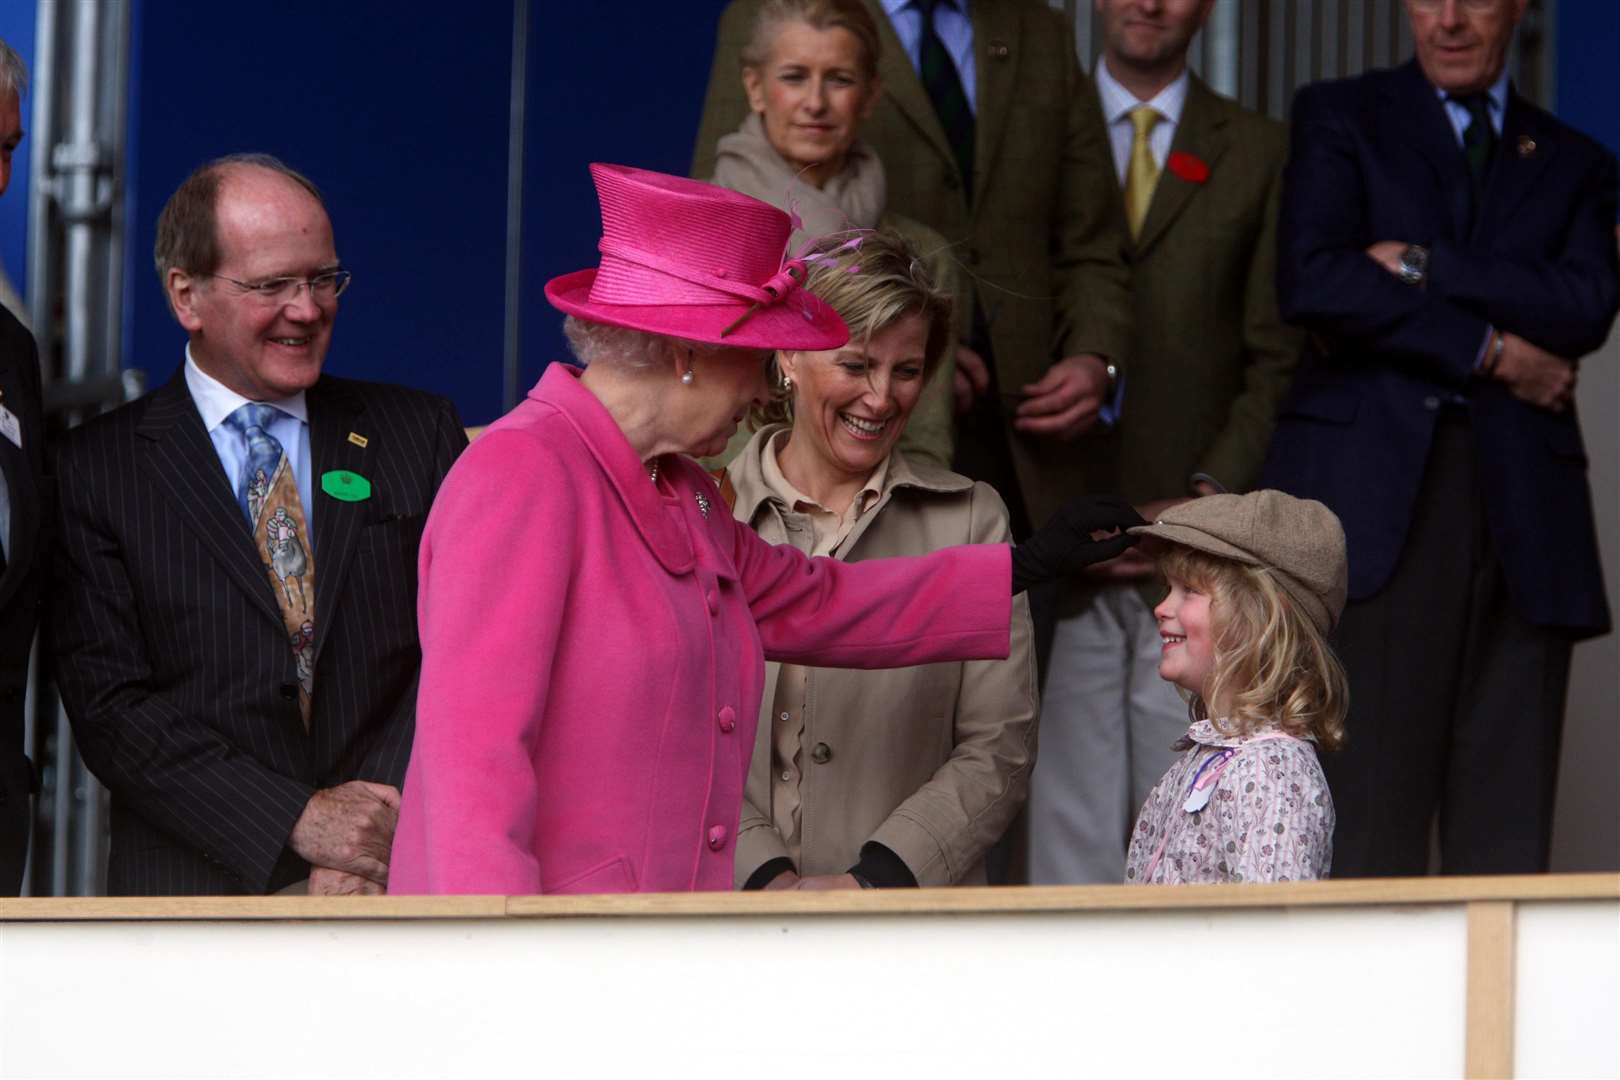 The Queen with her daughter-in-law the Countess of Wessex (centre) and granddaughter Lady Louise Windsor at the Royal Windsor Horse Show in 2011 (Steve Parsons/PA)